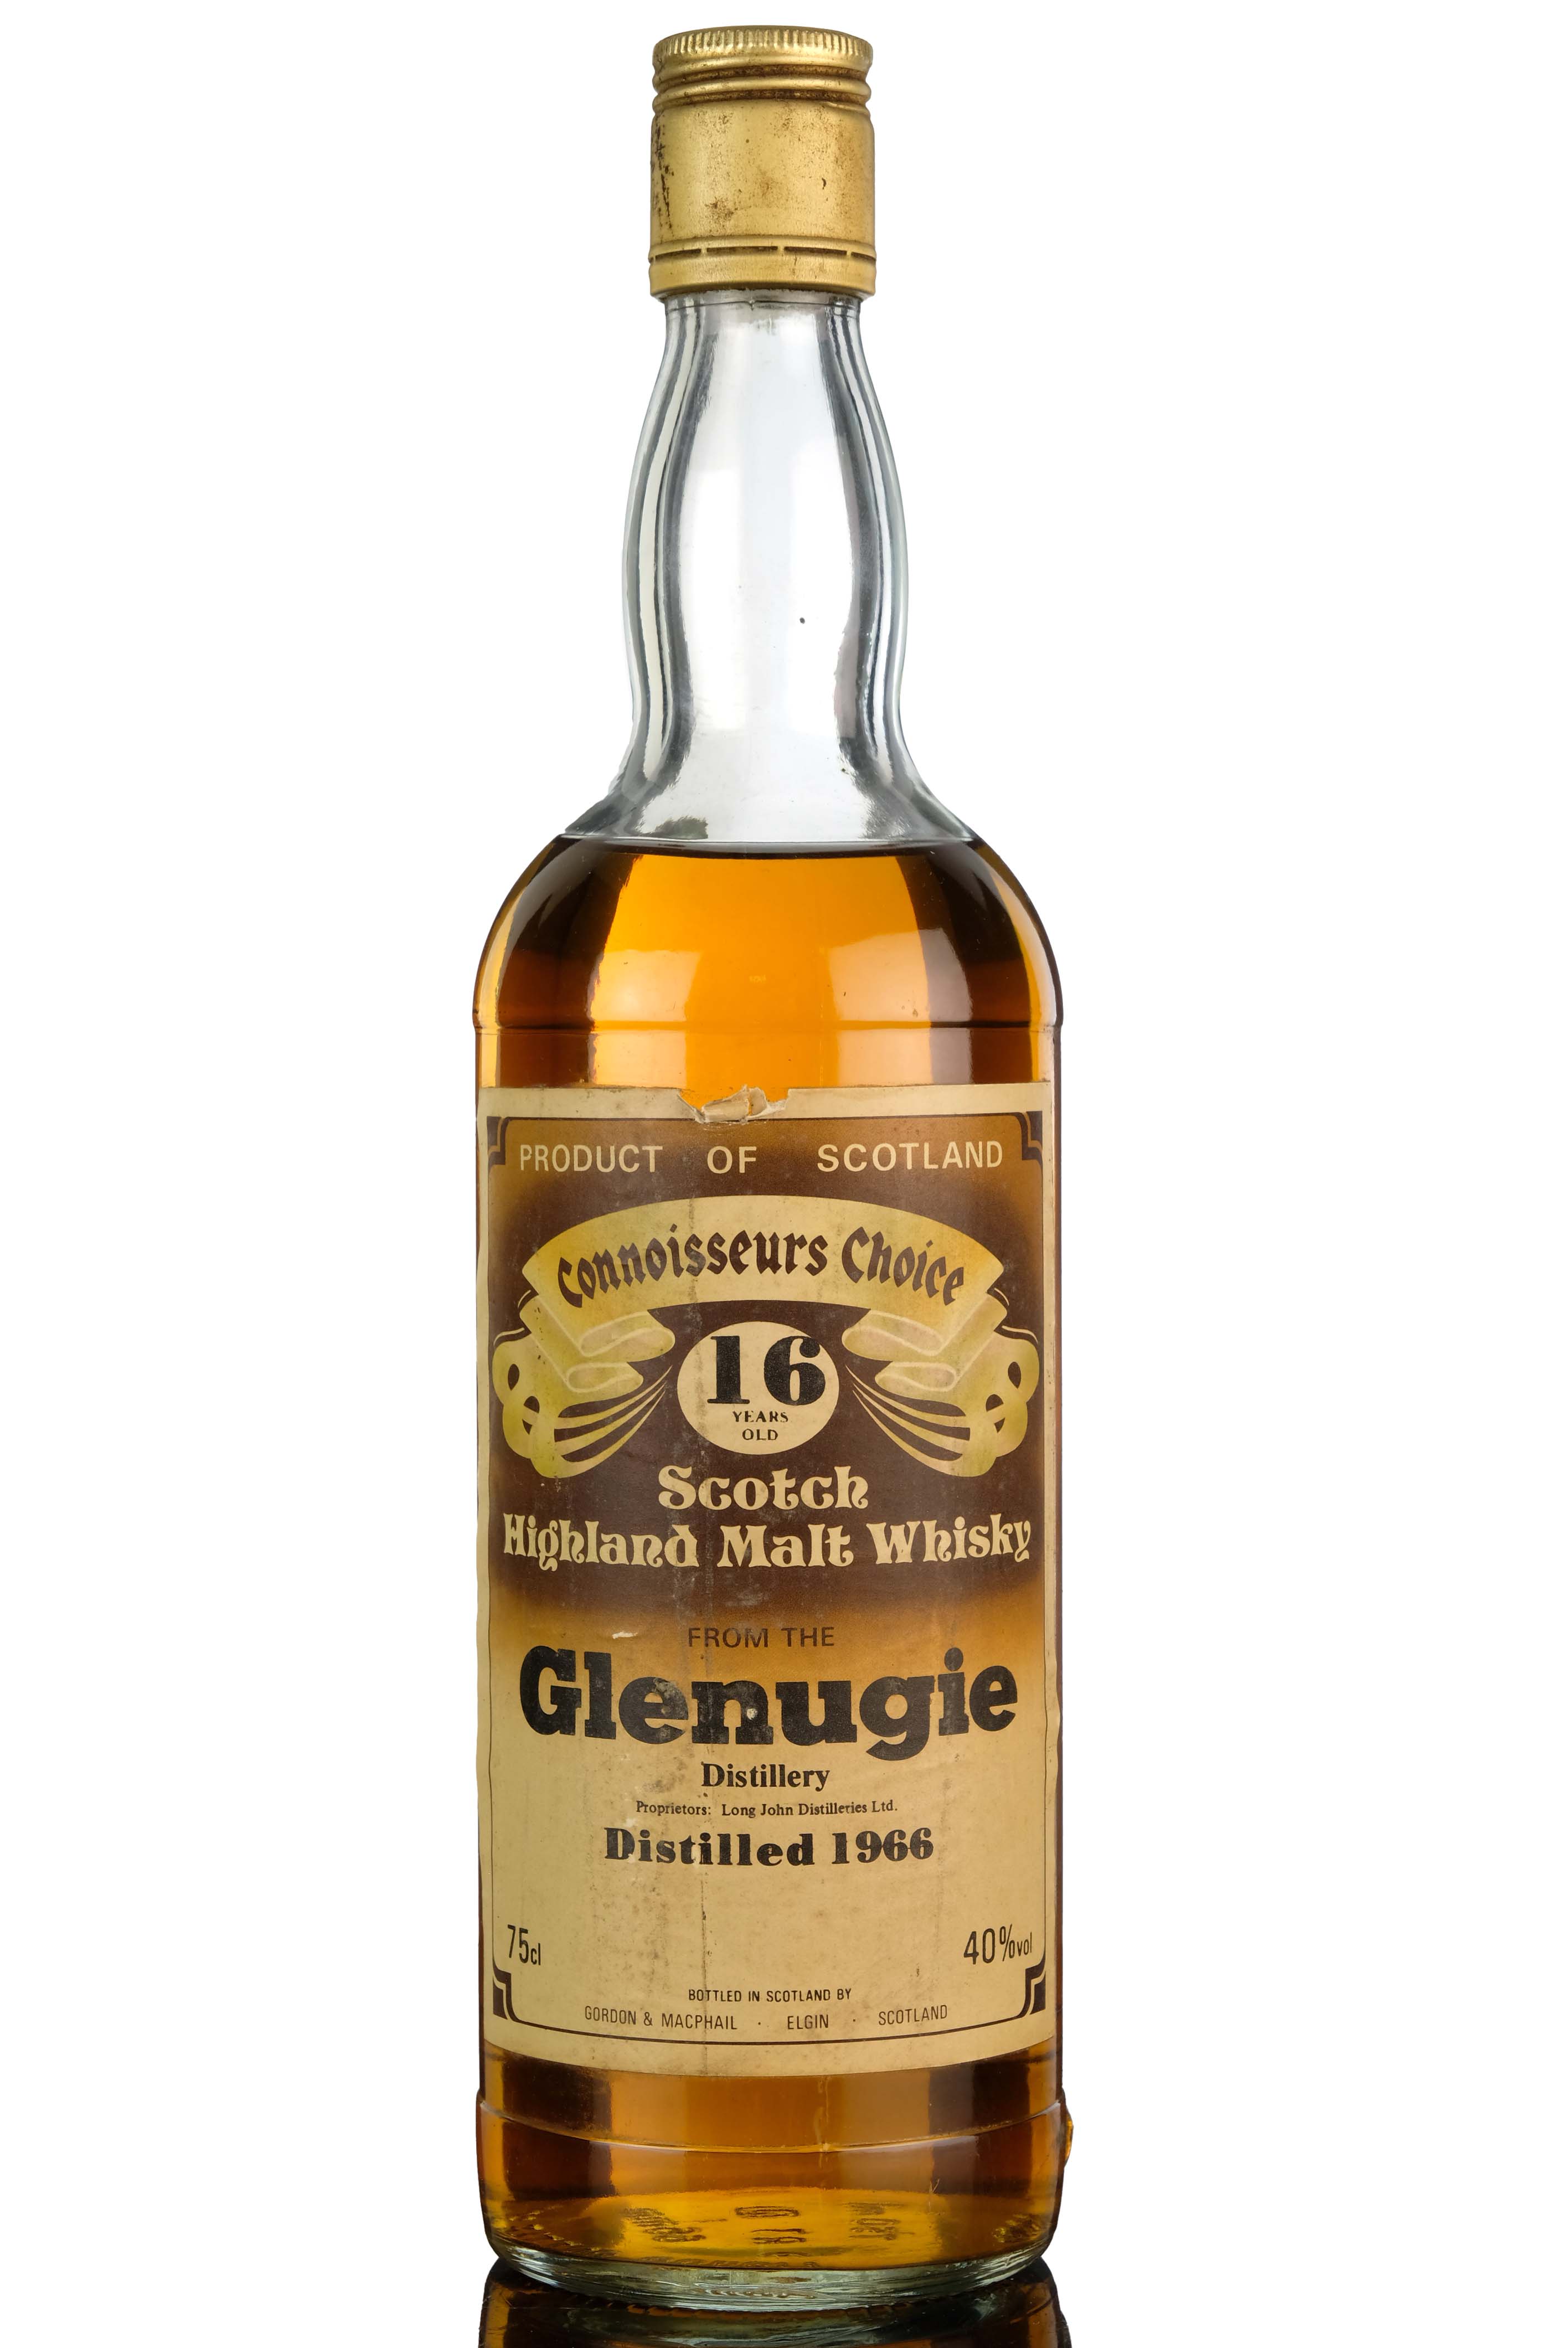 Glenugie 1966 - 16 Year Old - Connoisseurs Choice